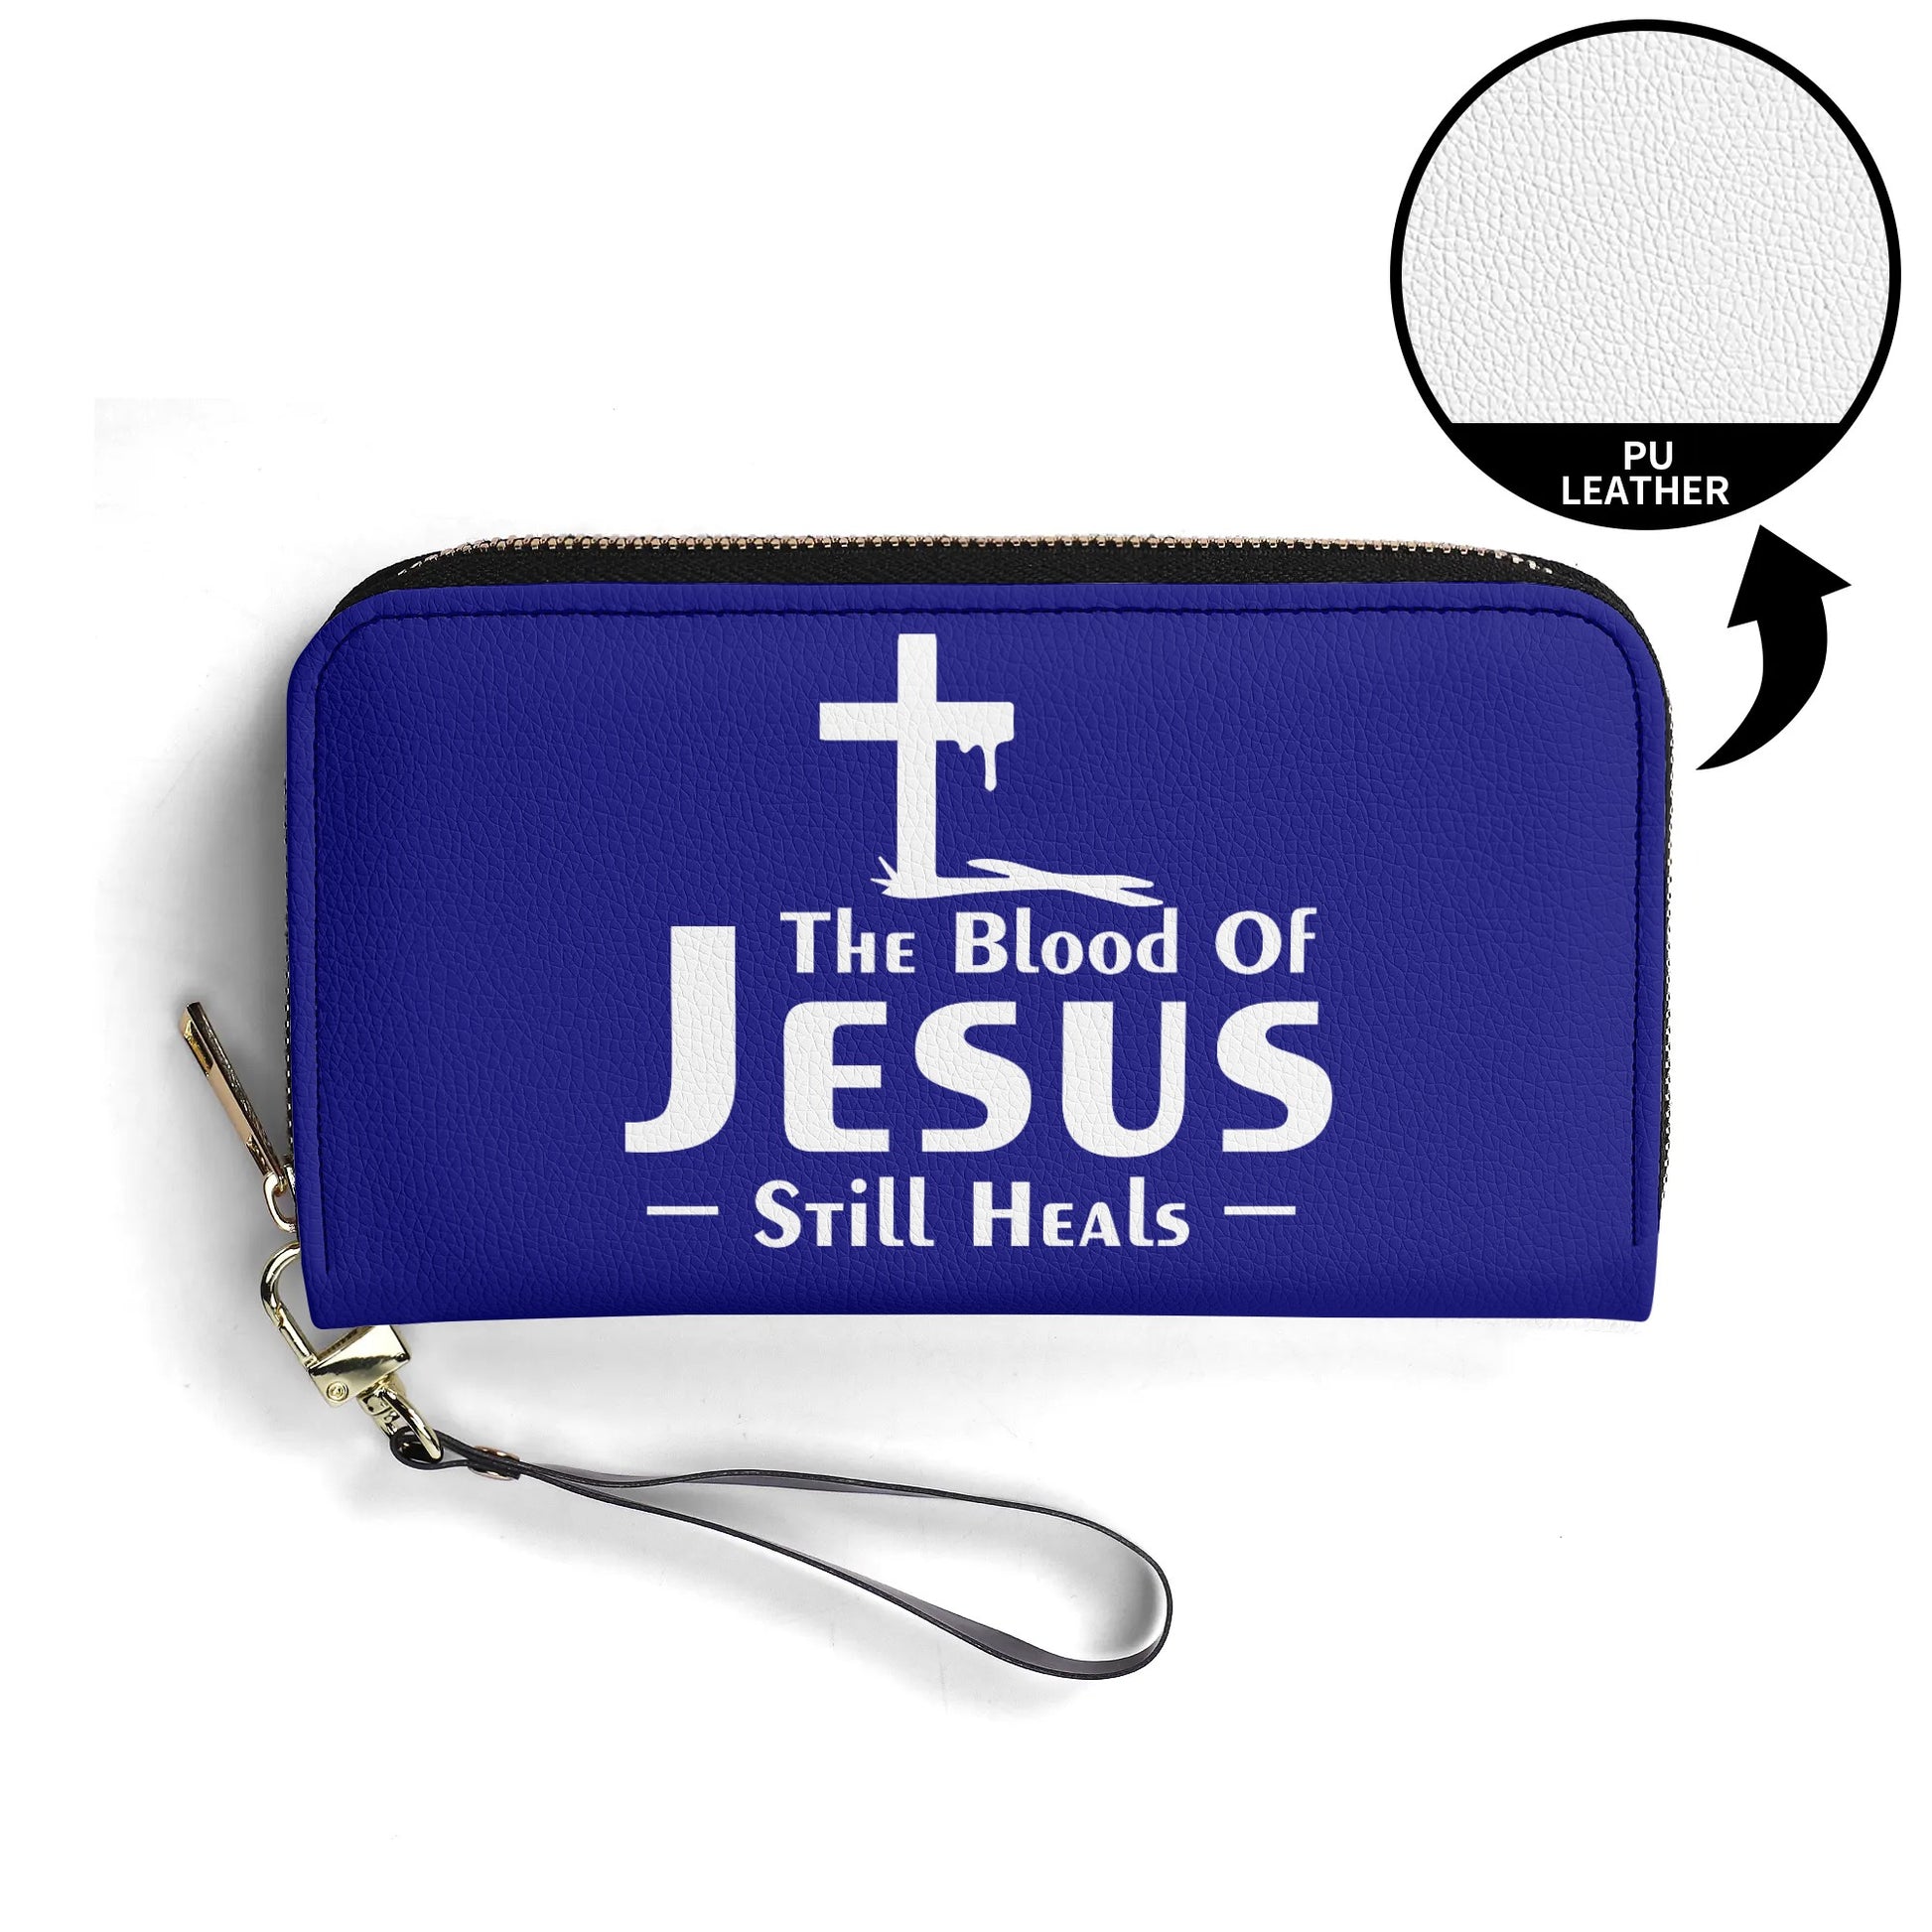 The Blood Of Jesus Still Heals PU Leather Womens Christian Wallet popcustoms